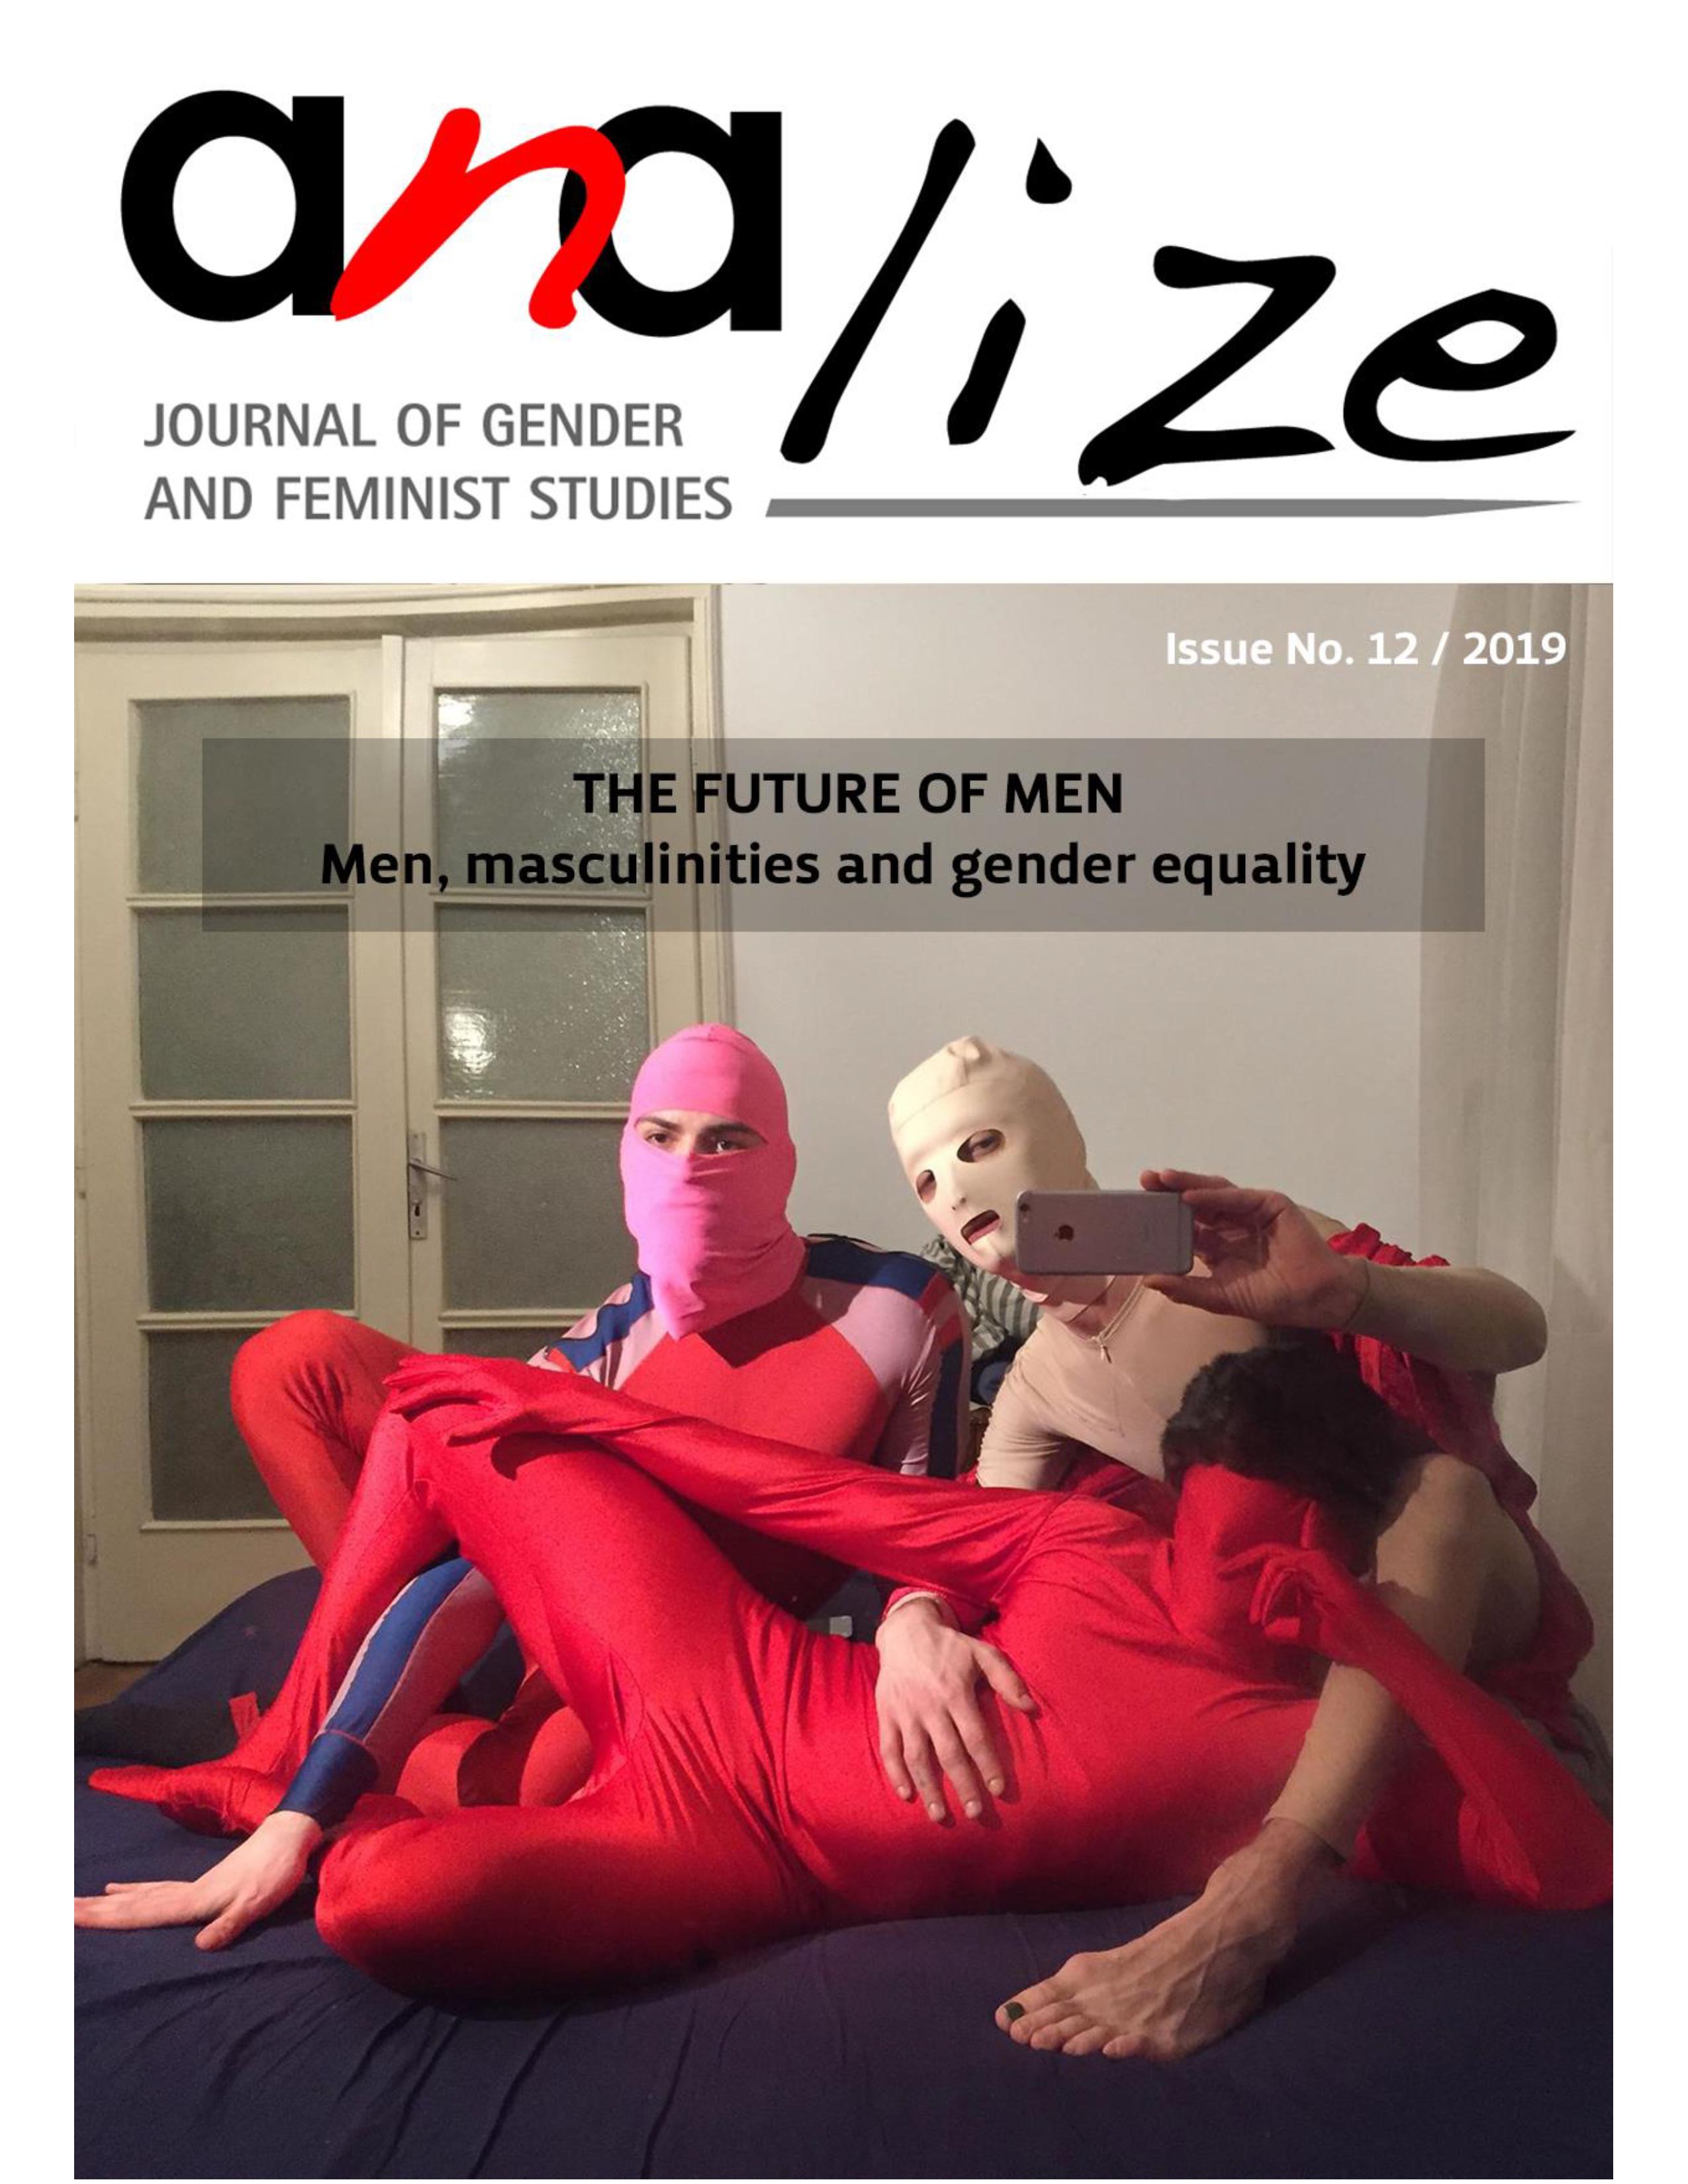 The Future of Men – Men, Masculinities and Gender Equality